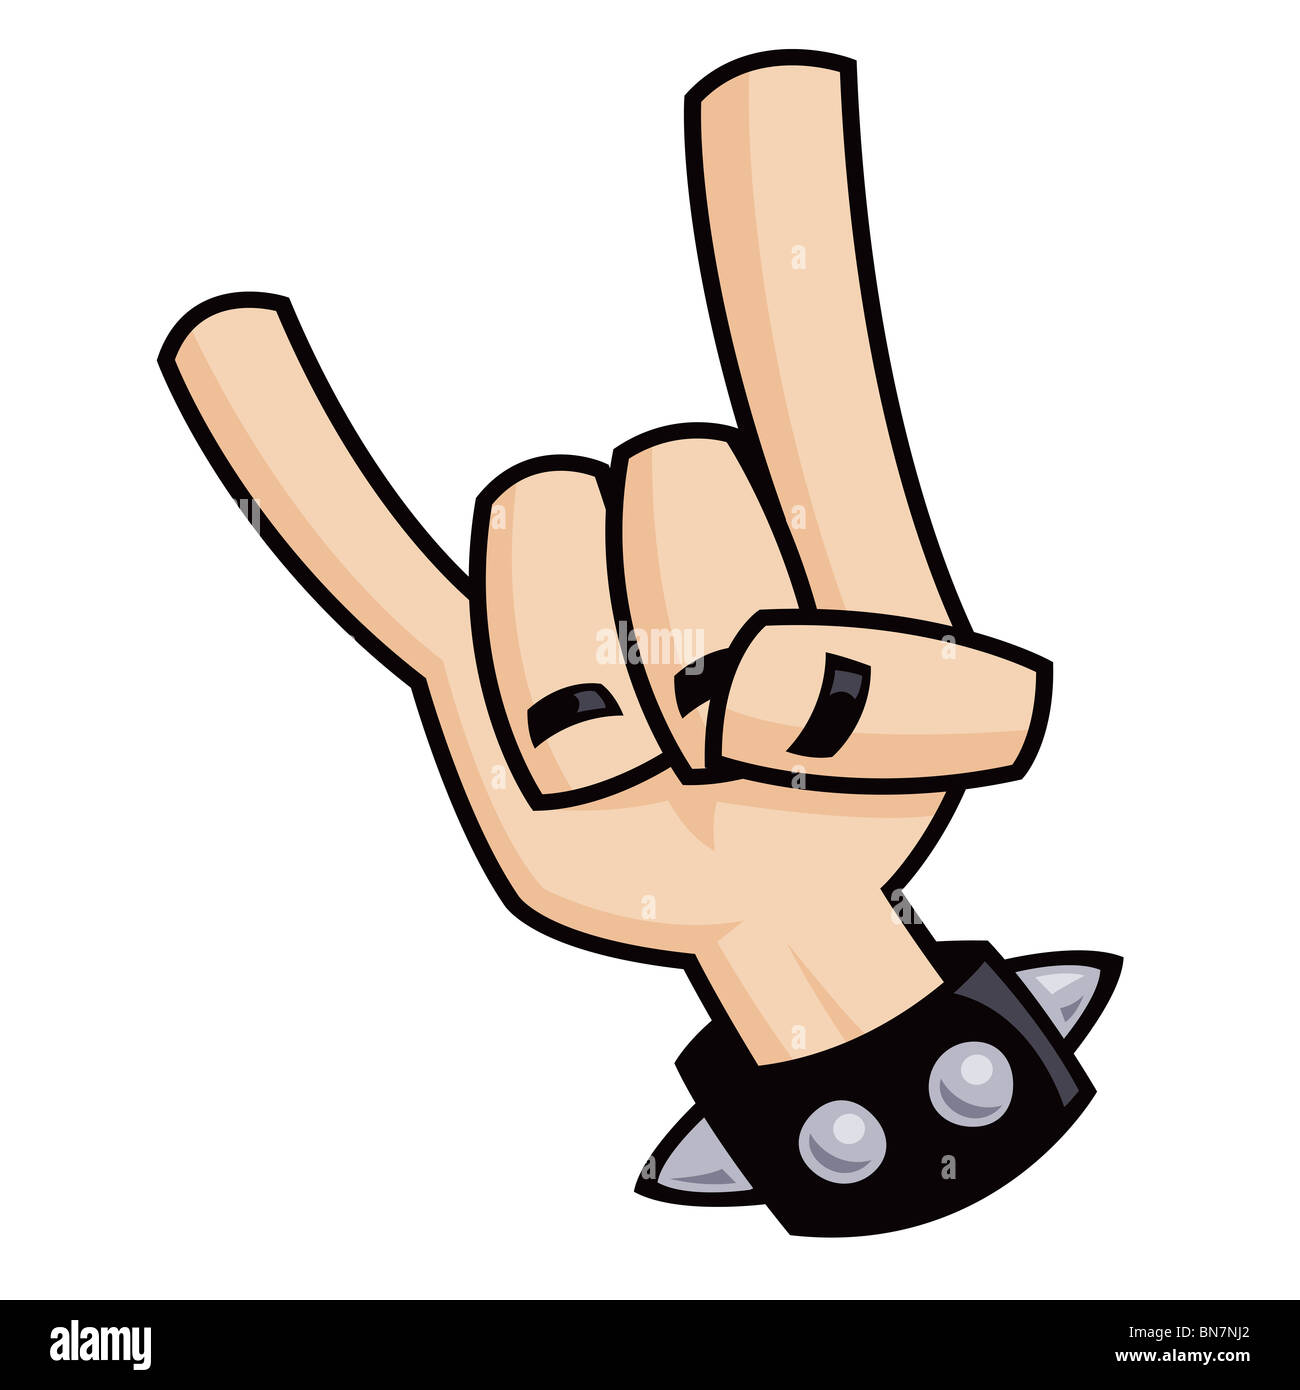 Heavy metal, rock and roll, devil horns hand sign with a black leather studded bracelet. Stock Photo